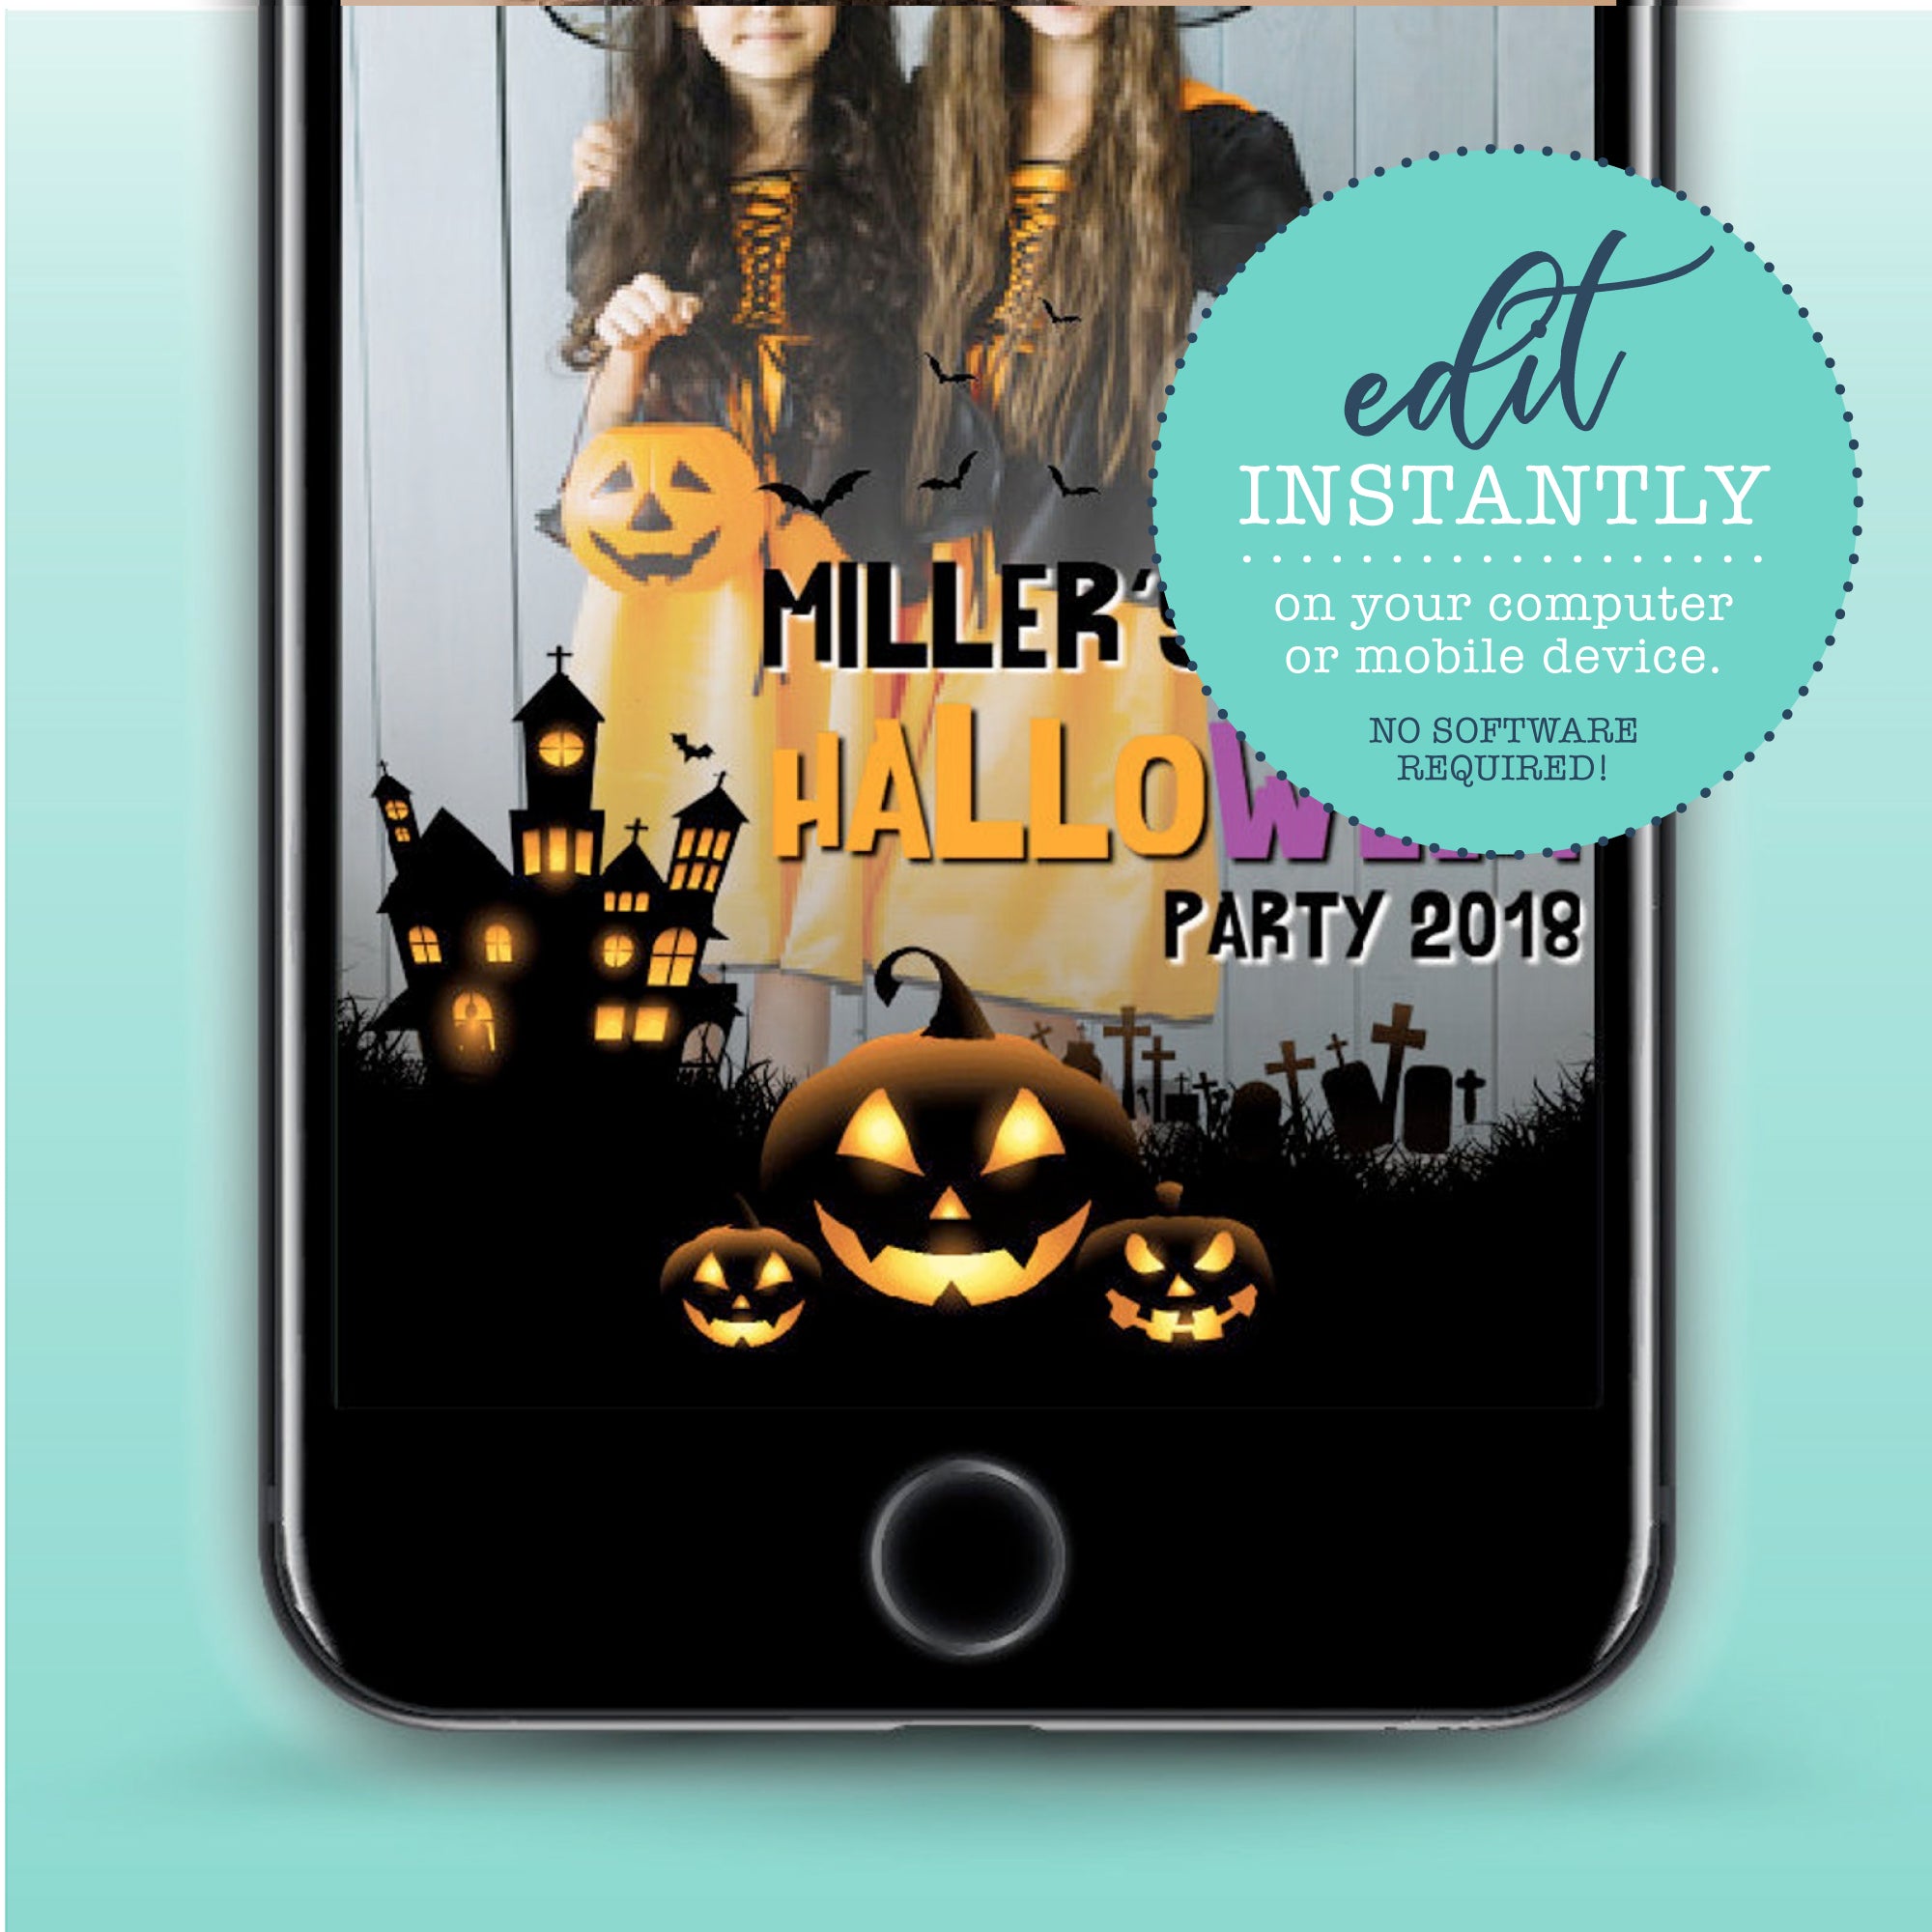 Halloween Party Snapchat Geofilter